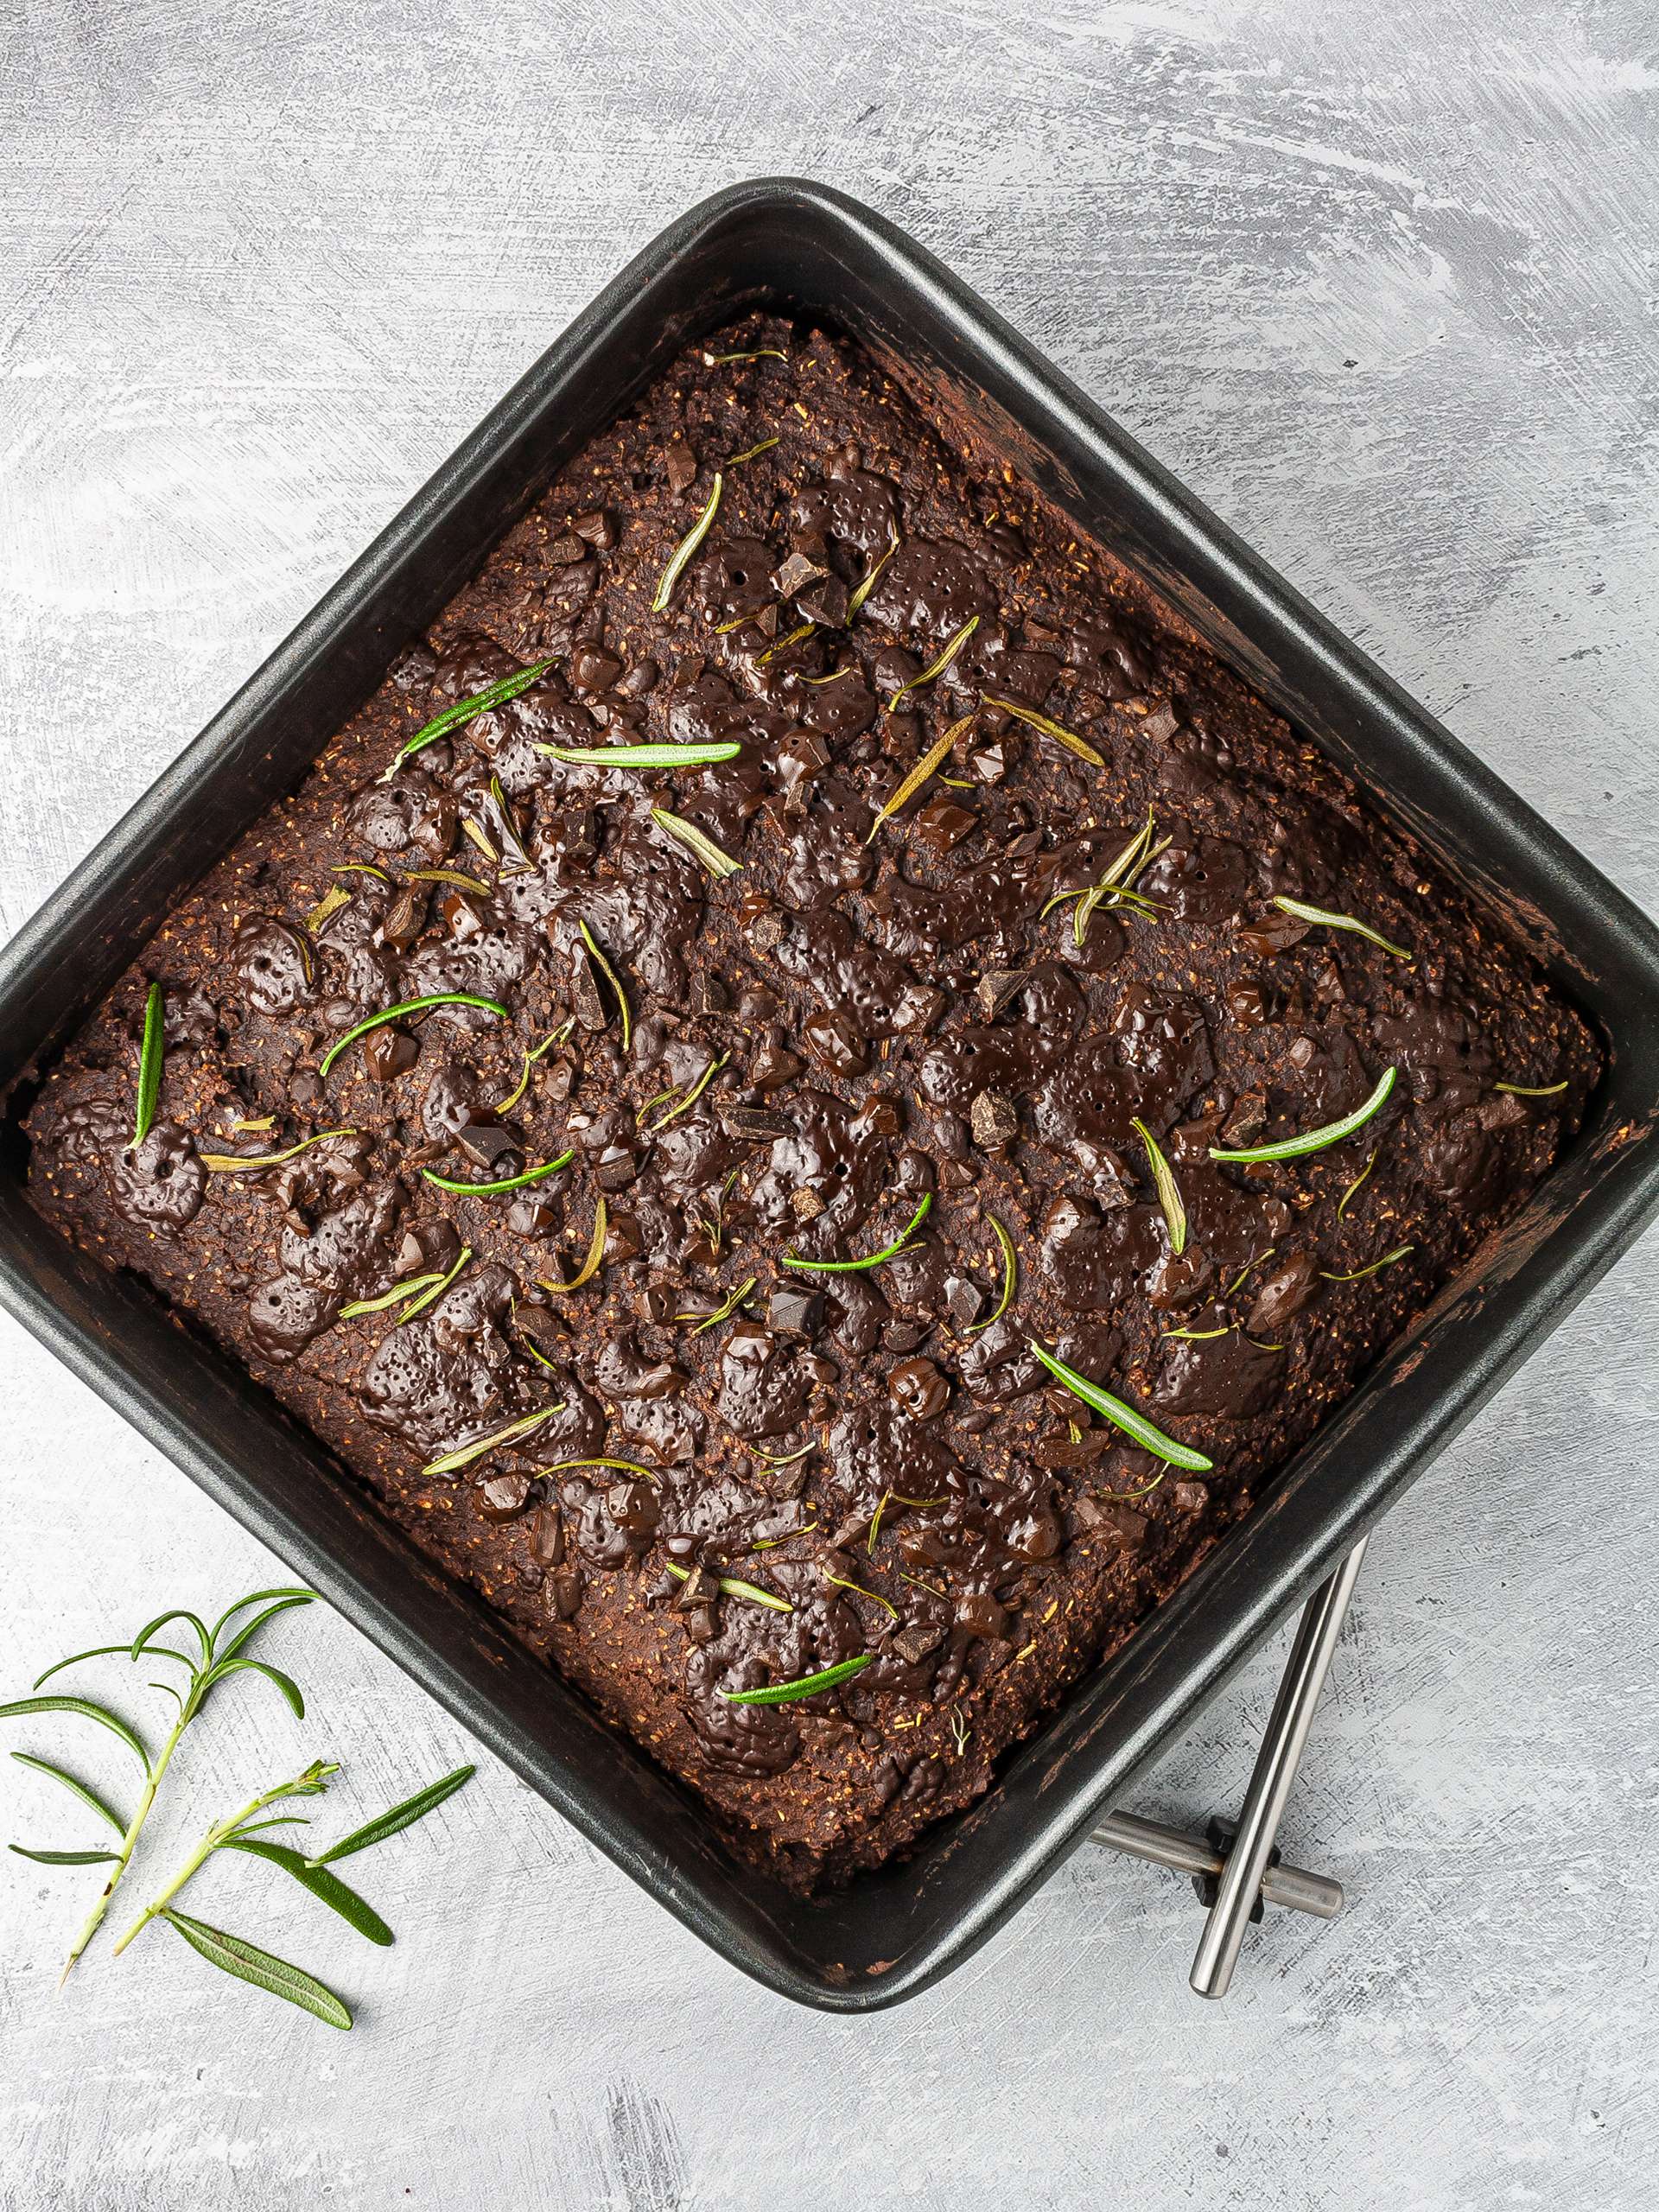 Baked rosemary brownies with chocolate chunks and rosemary leaves.